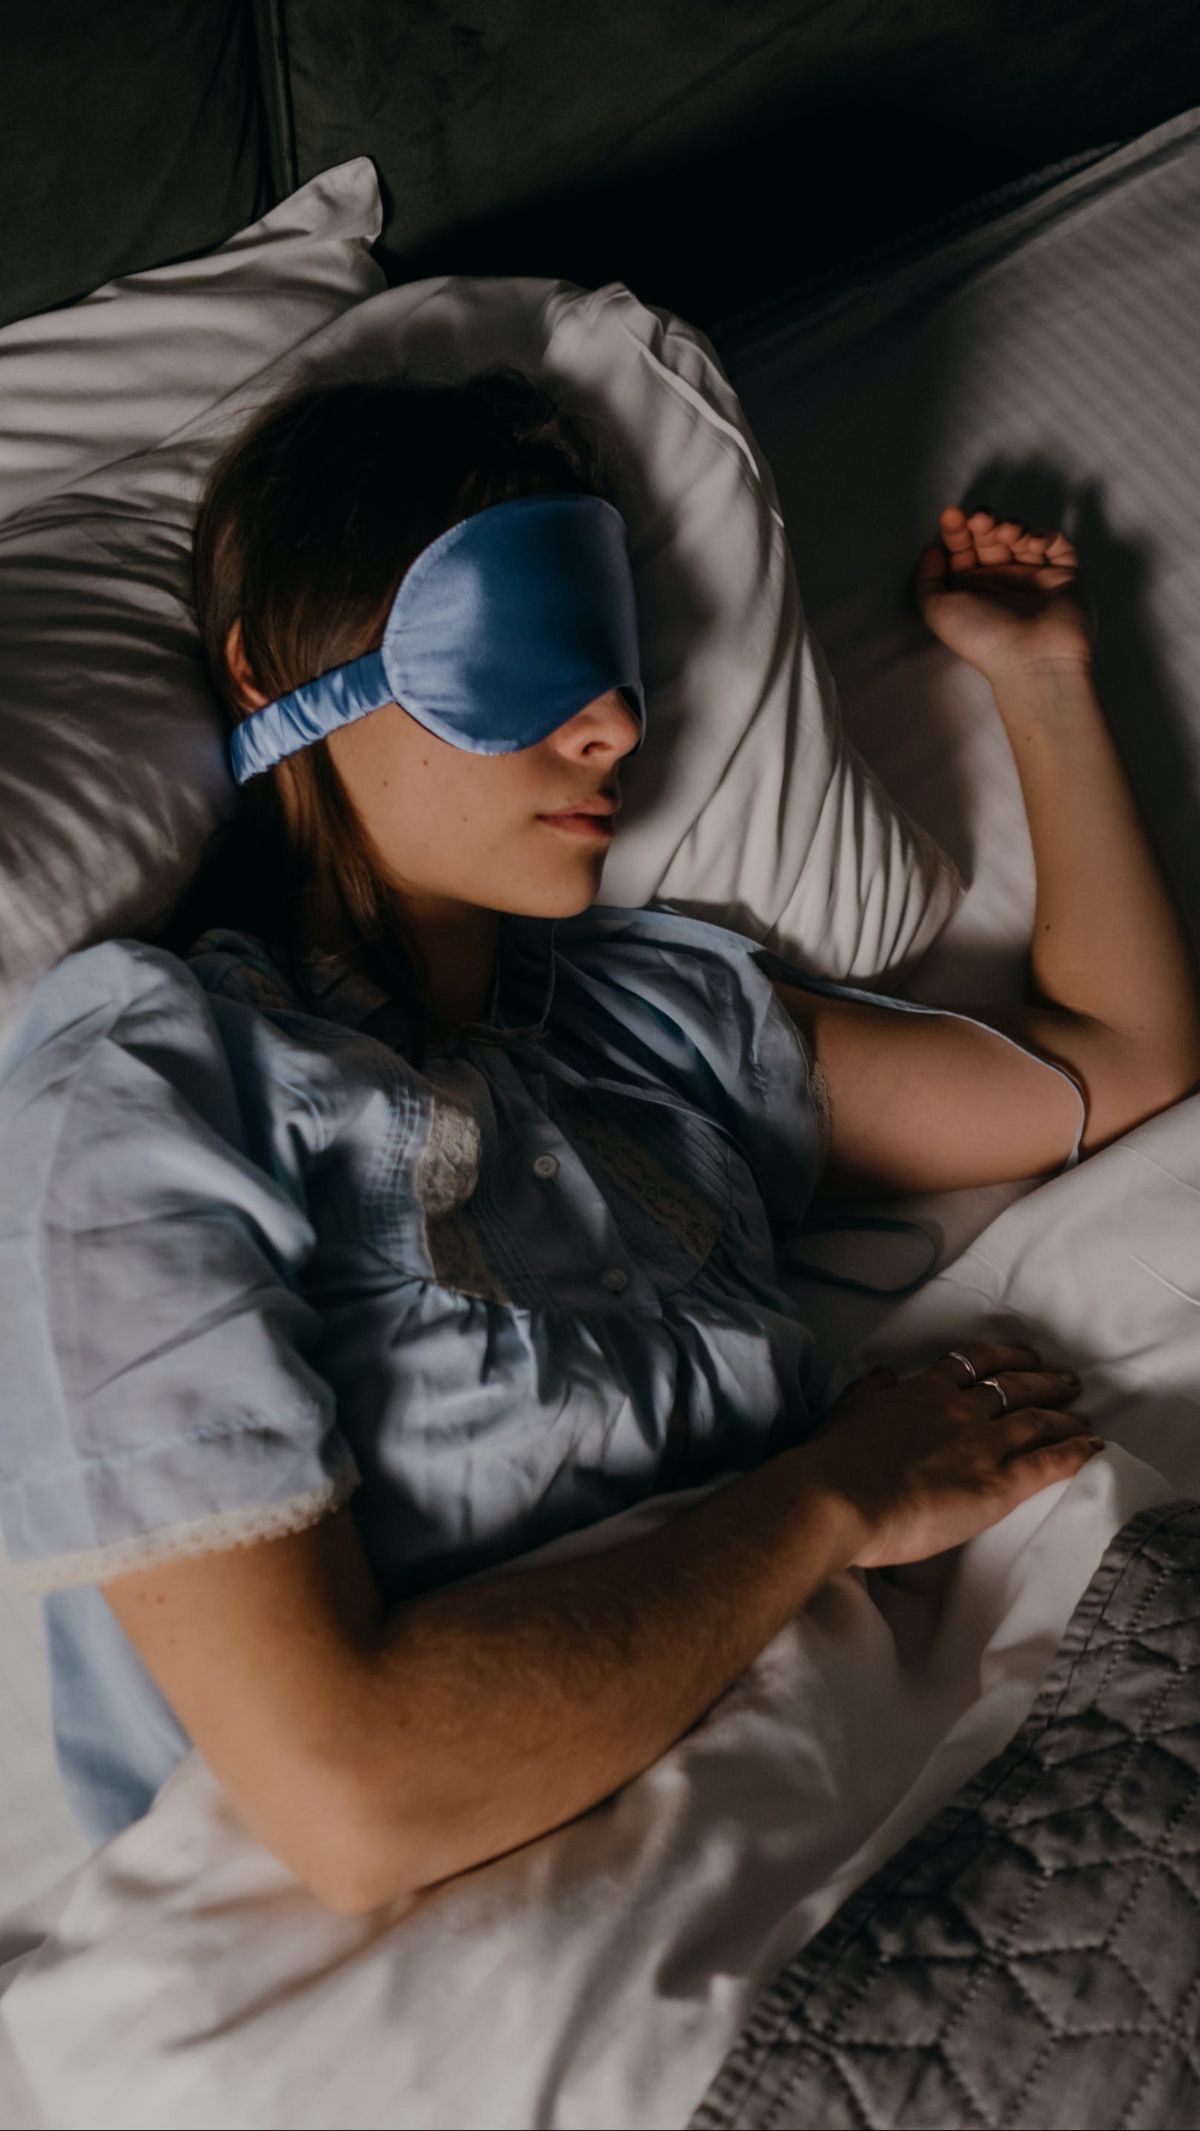 May these tips to fall asleep be your companions to bedtime bliss. Make sure that each night becomes a chance for rejuvenation and renewal. Sleep well, and embrace the peaceful dreams that await.